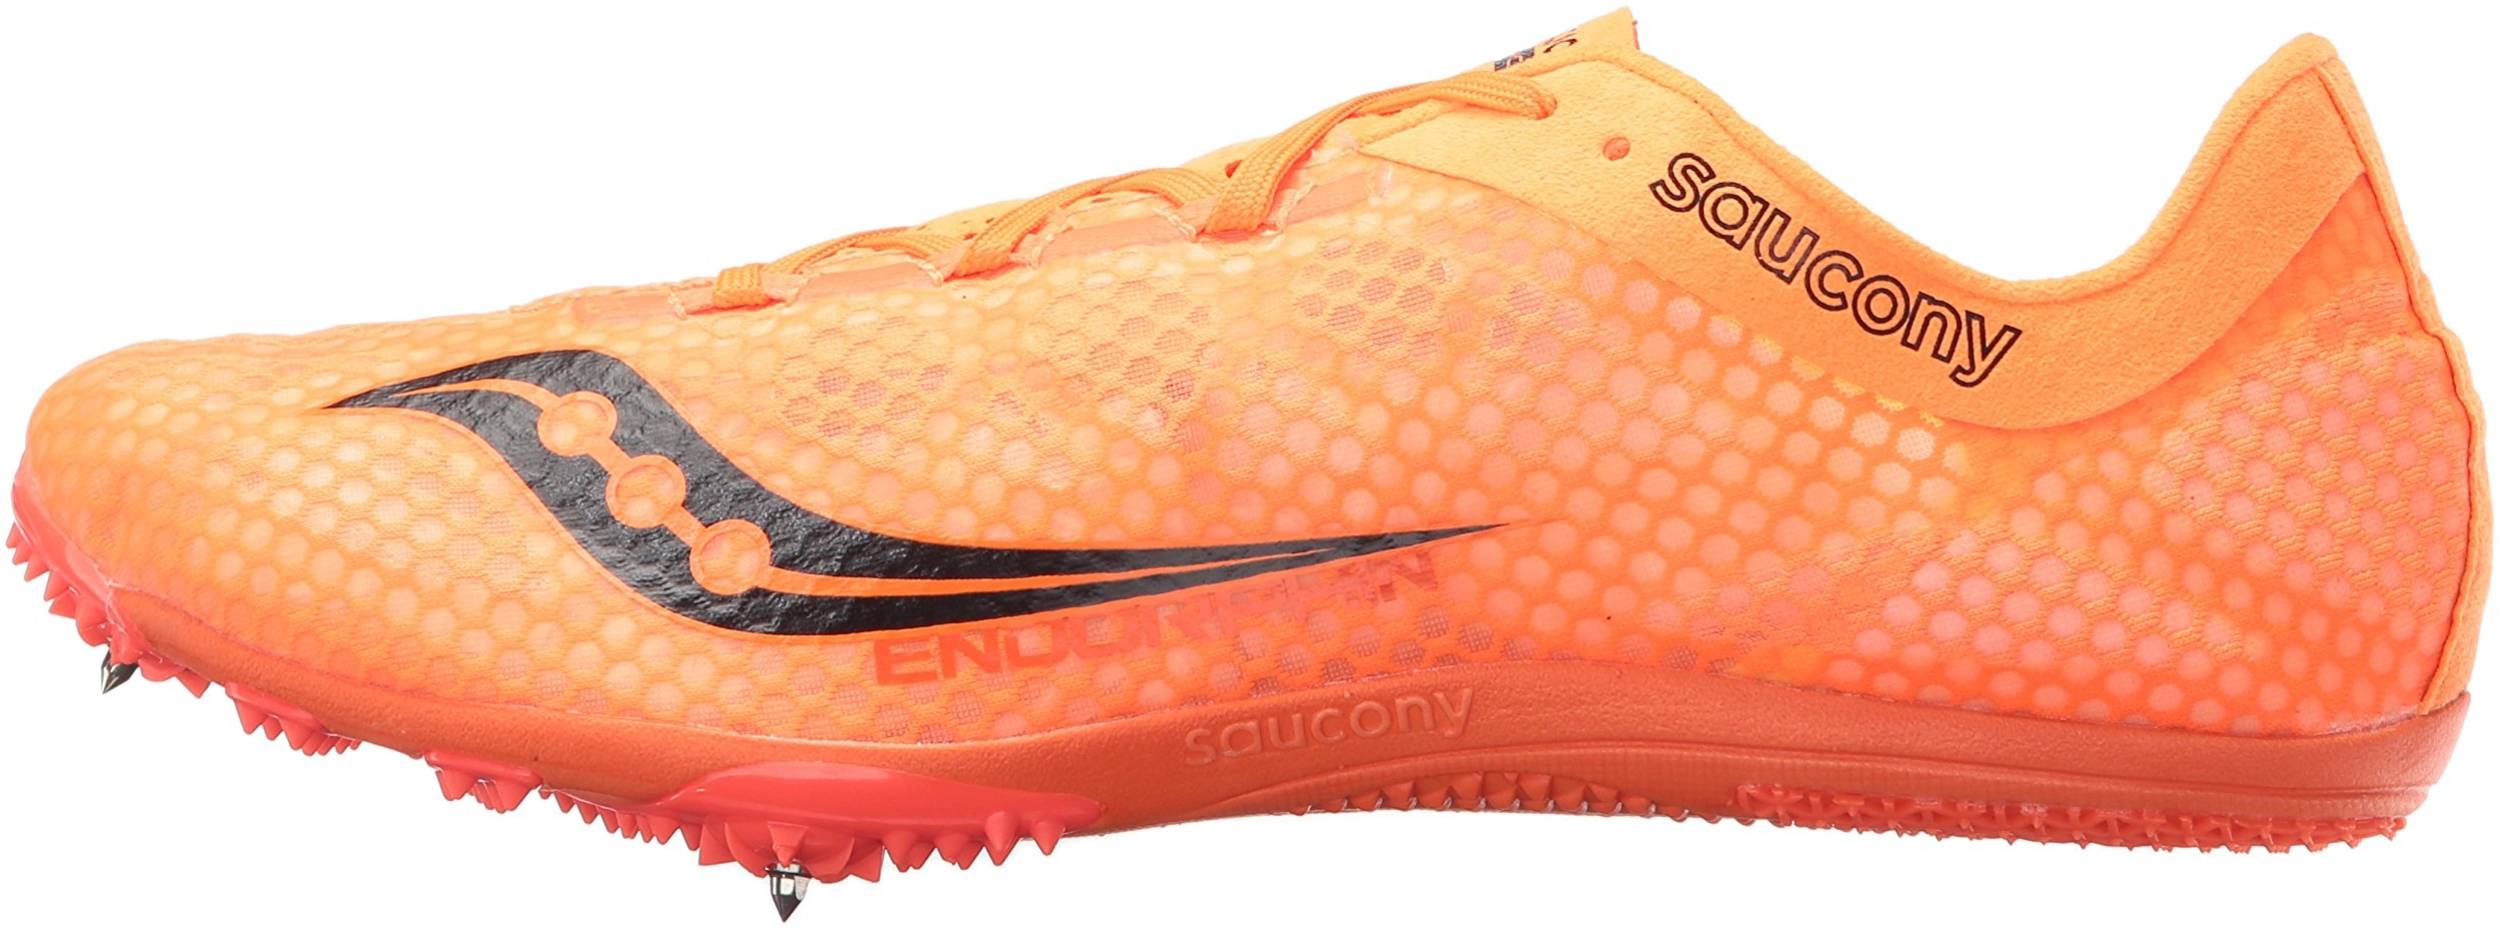 saucony football boots